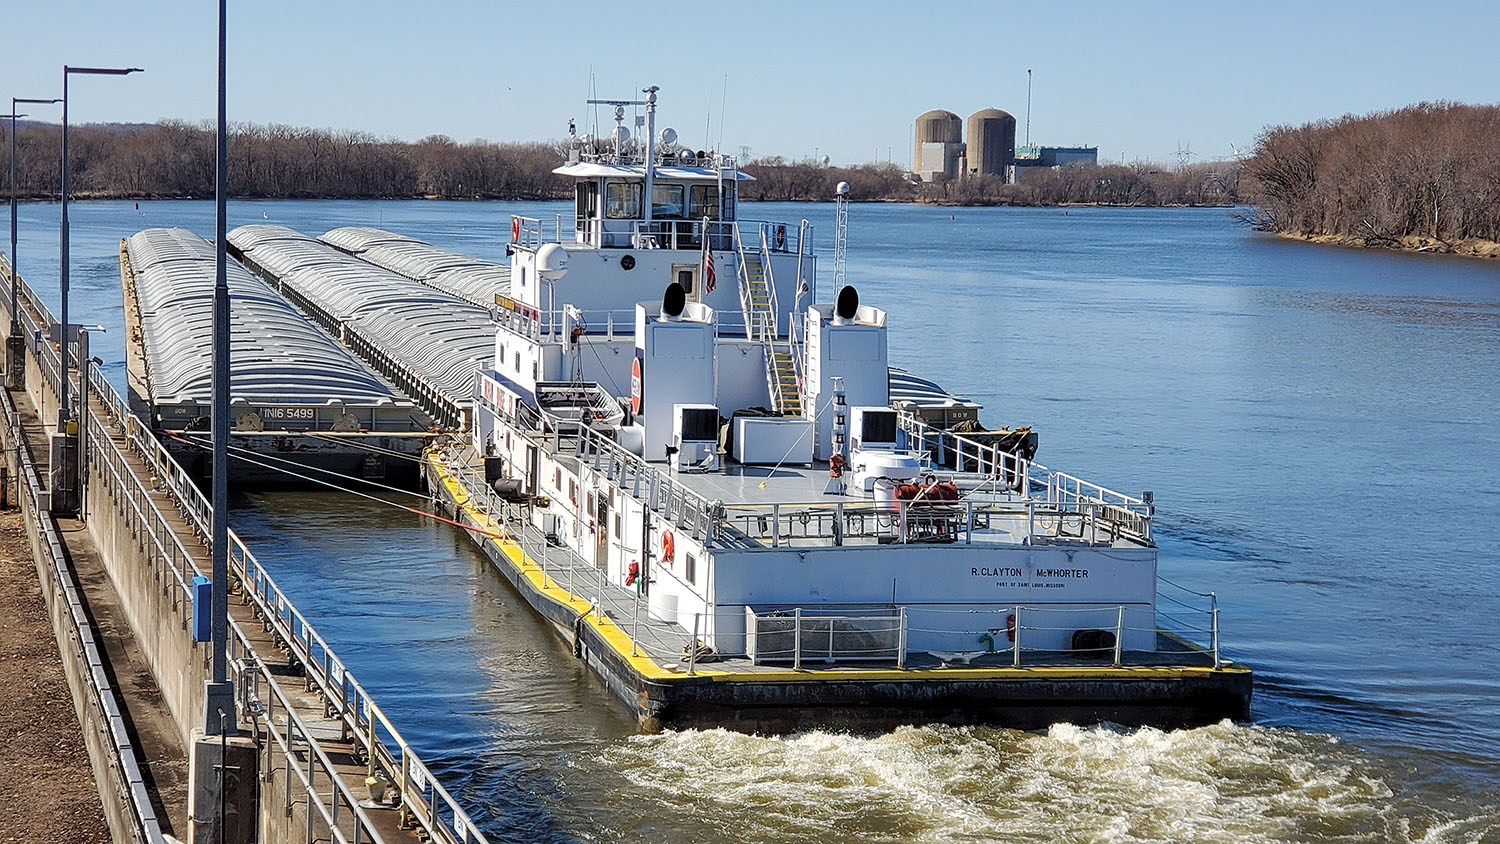 The R. Clayton McWhorter exits Lock 3 on the Upper Mississippi River March 19. (Photo courtesy of St. Paul Engineer District)